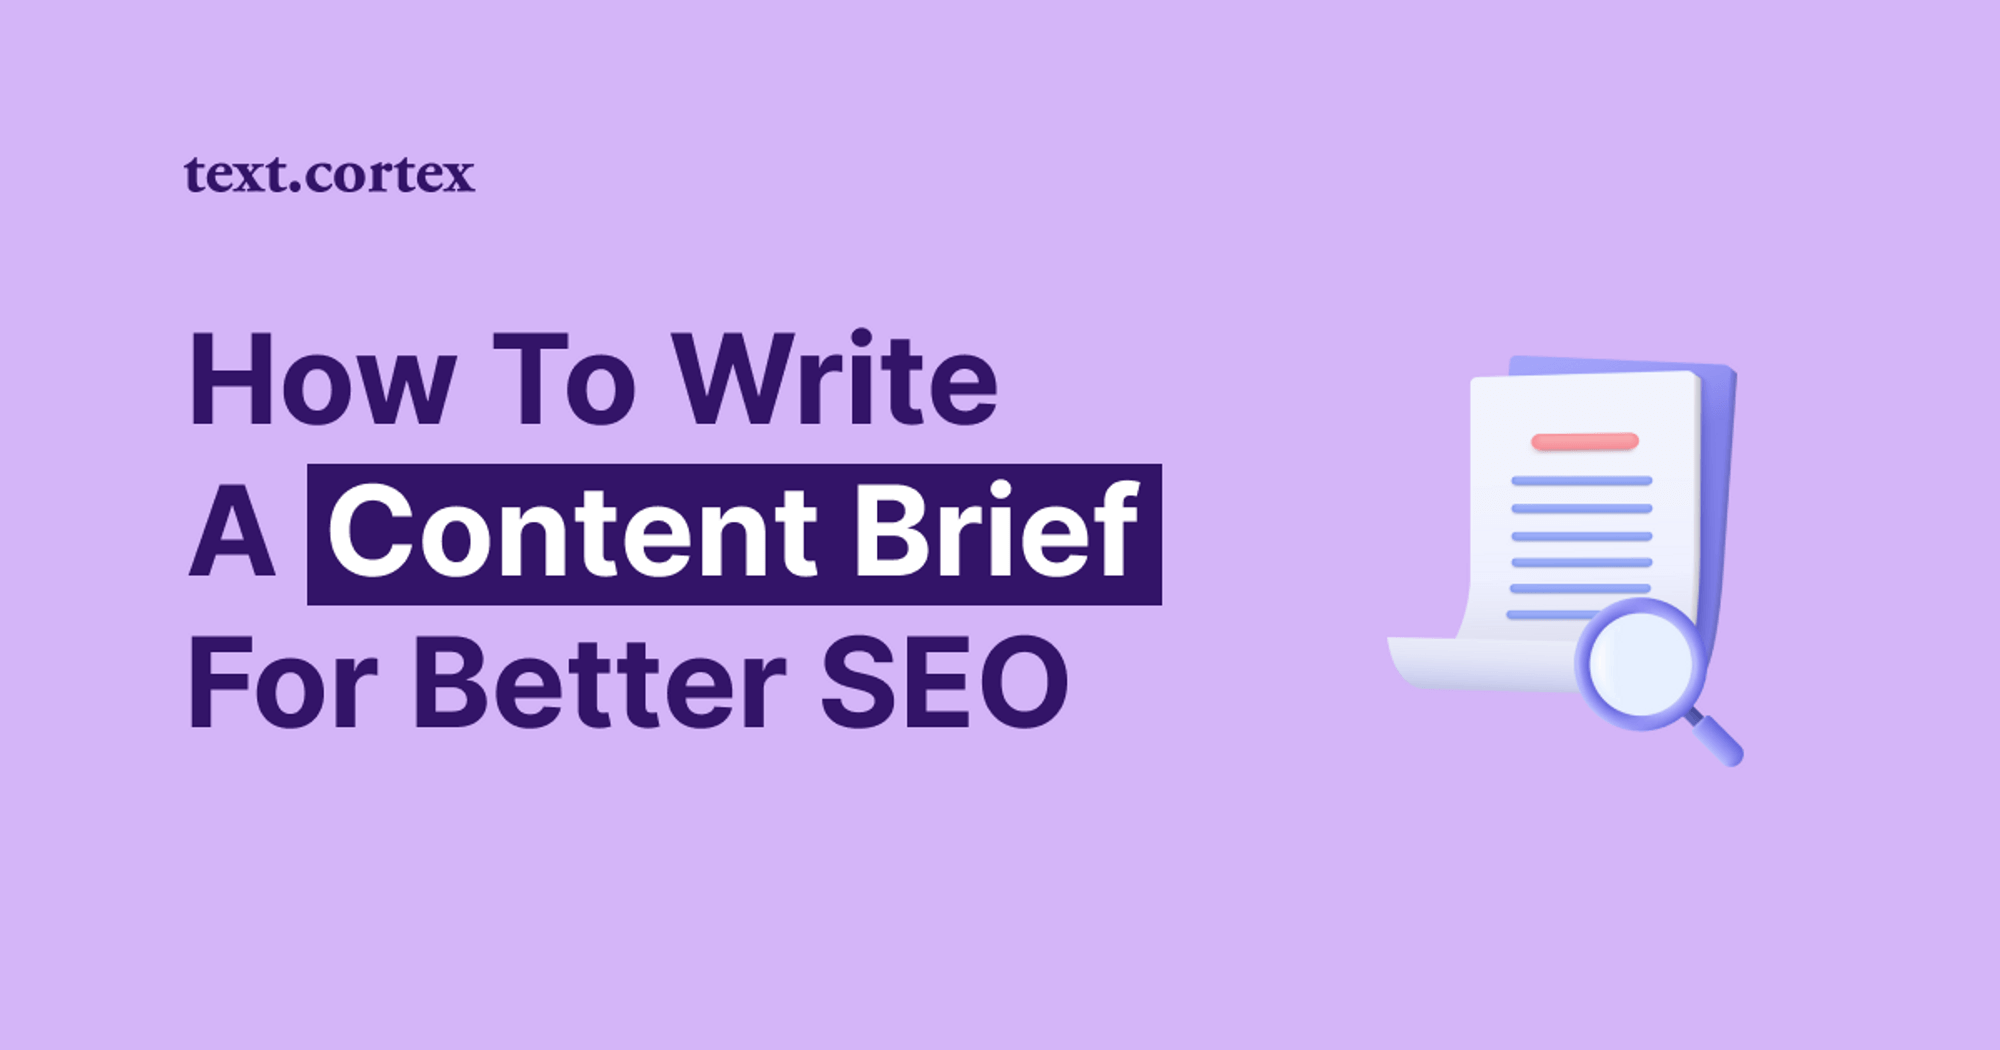 How To Write a Content Brief For Better SEO